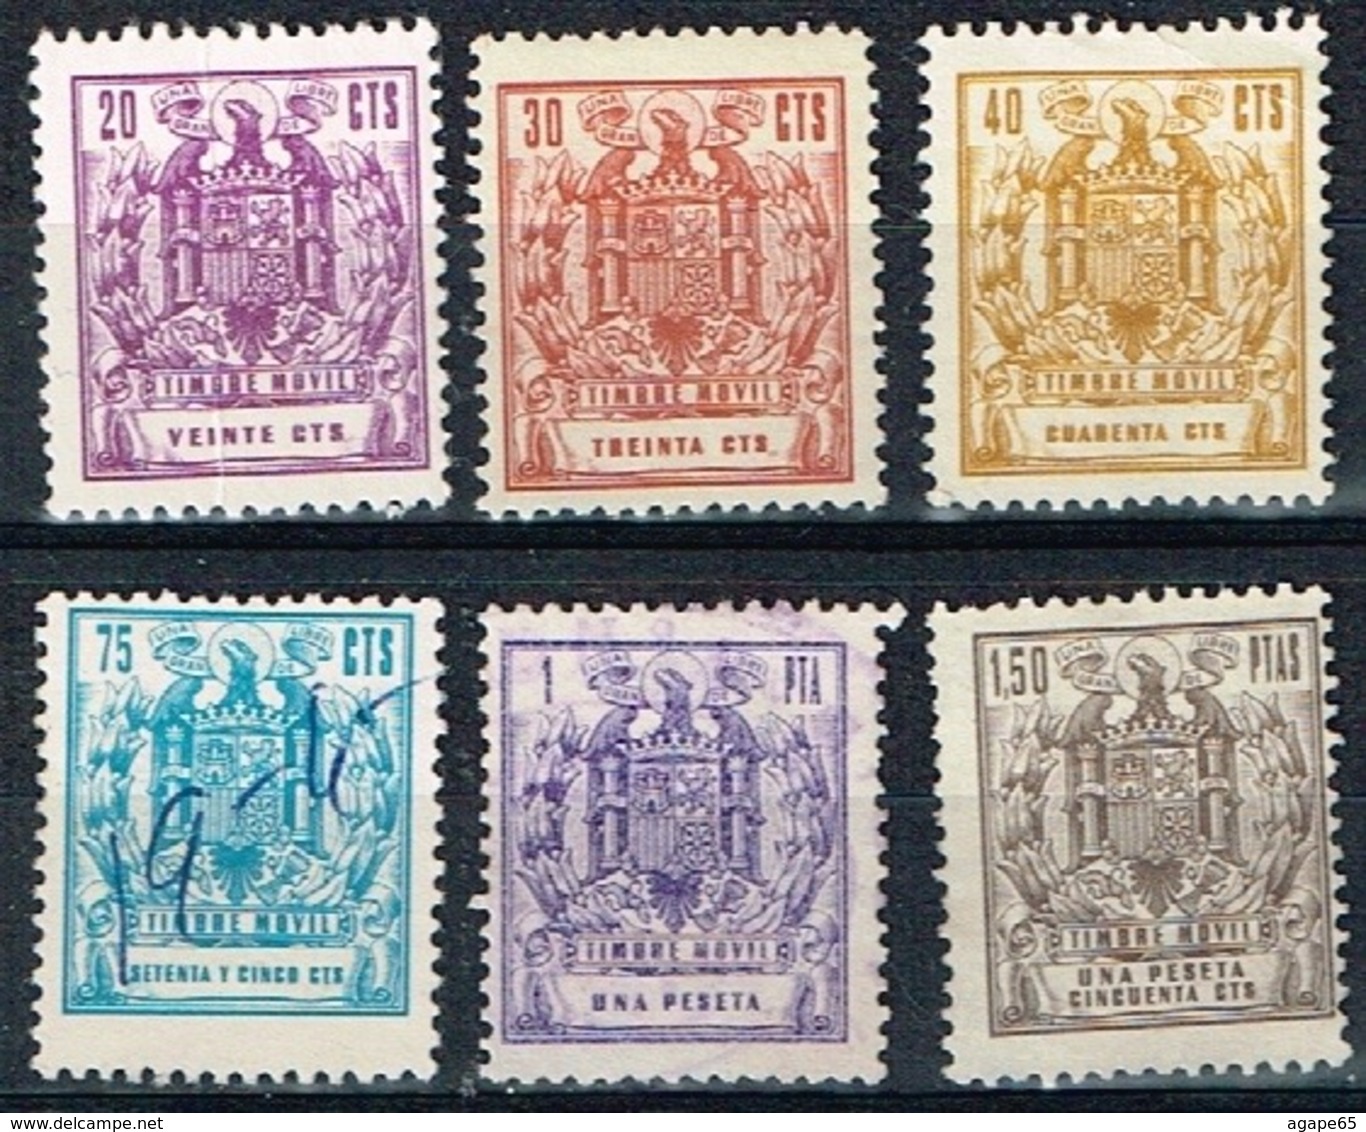 Timbre Móvil 1960-76, 20,30,40 & 75 Cts, 1 & 1,50 Pts - Fiscales